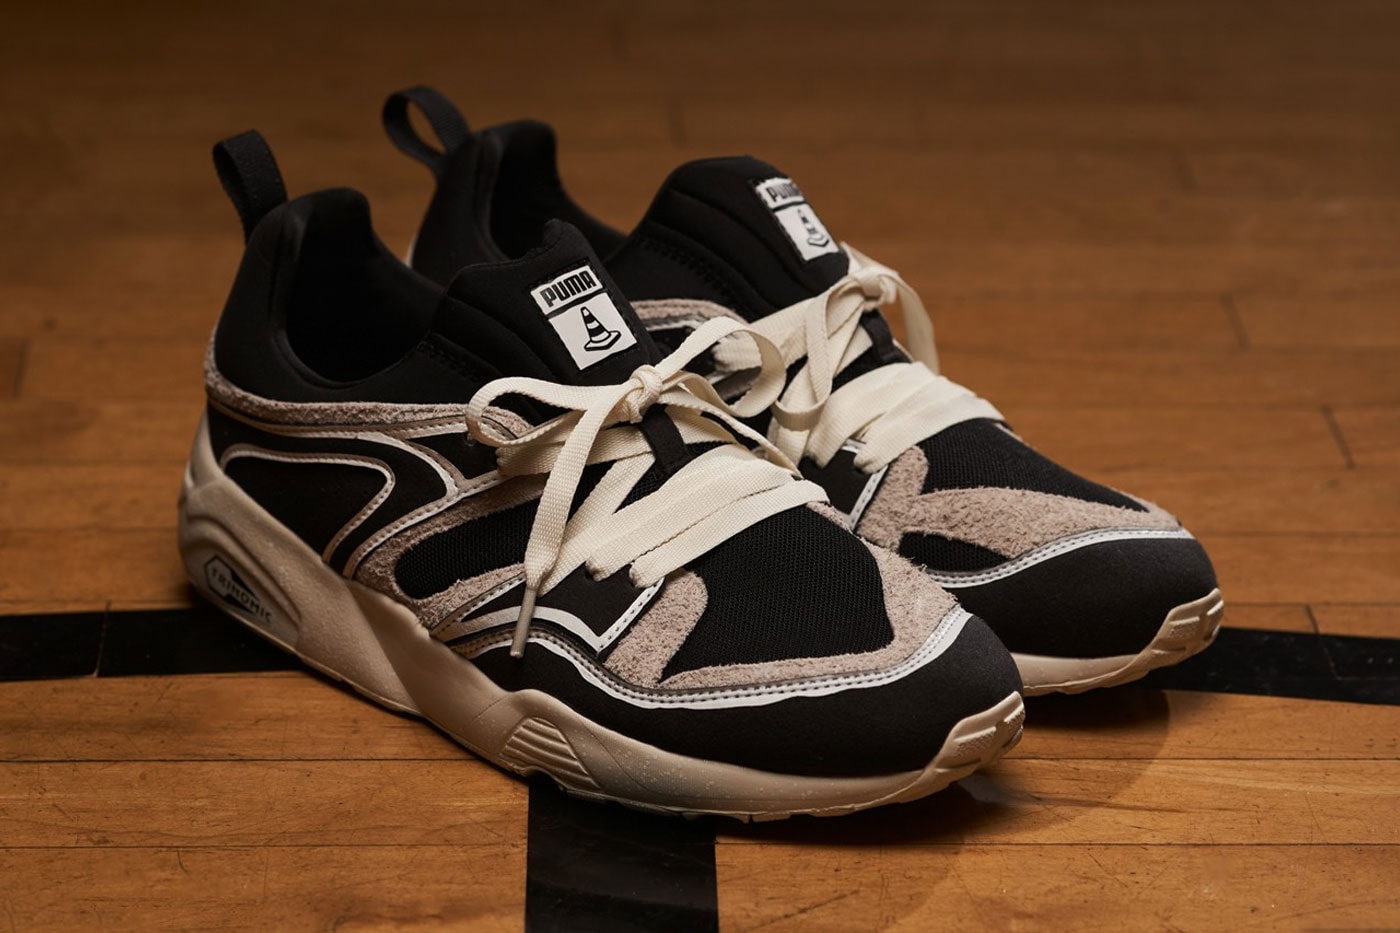 Joshua Vides PUMA Hoops Collection Release Date info store list buying guide photos price mikey williams foot locker blaze of glory trinomic blaze court